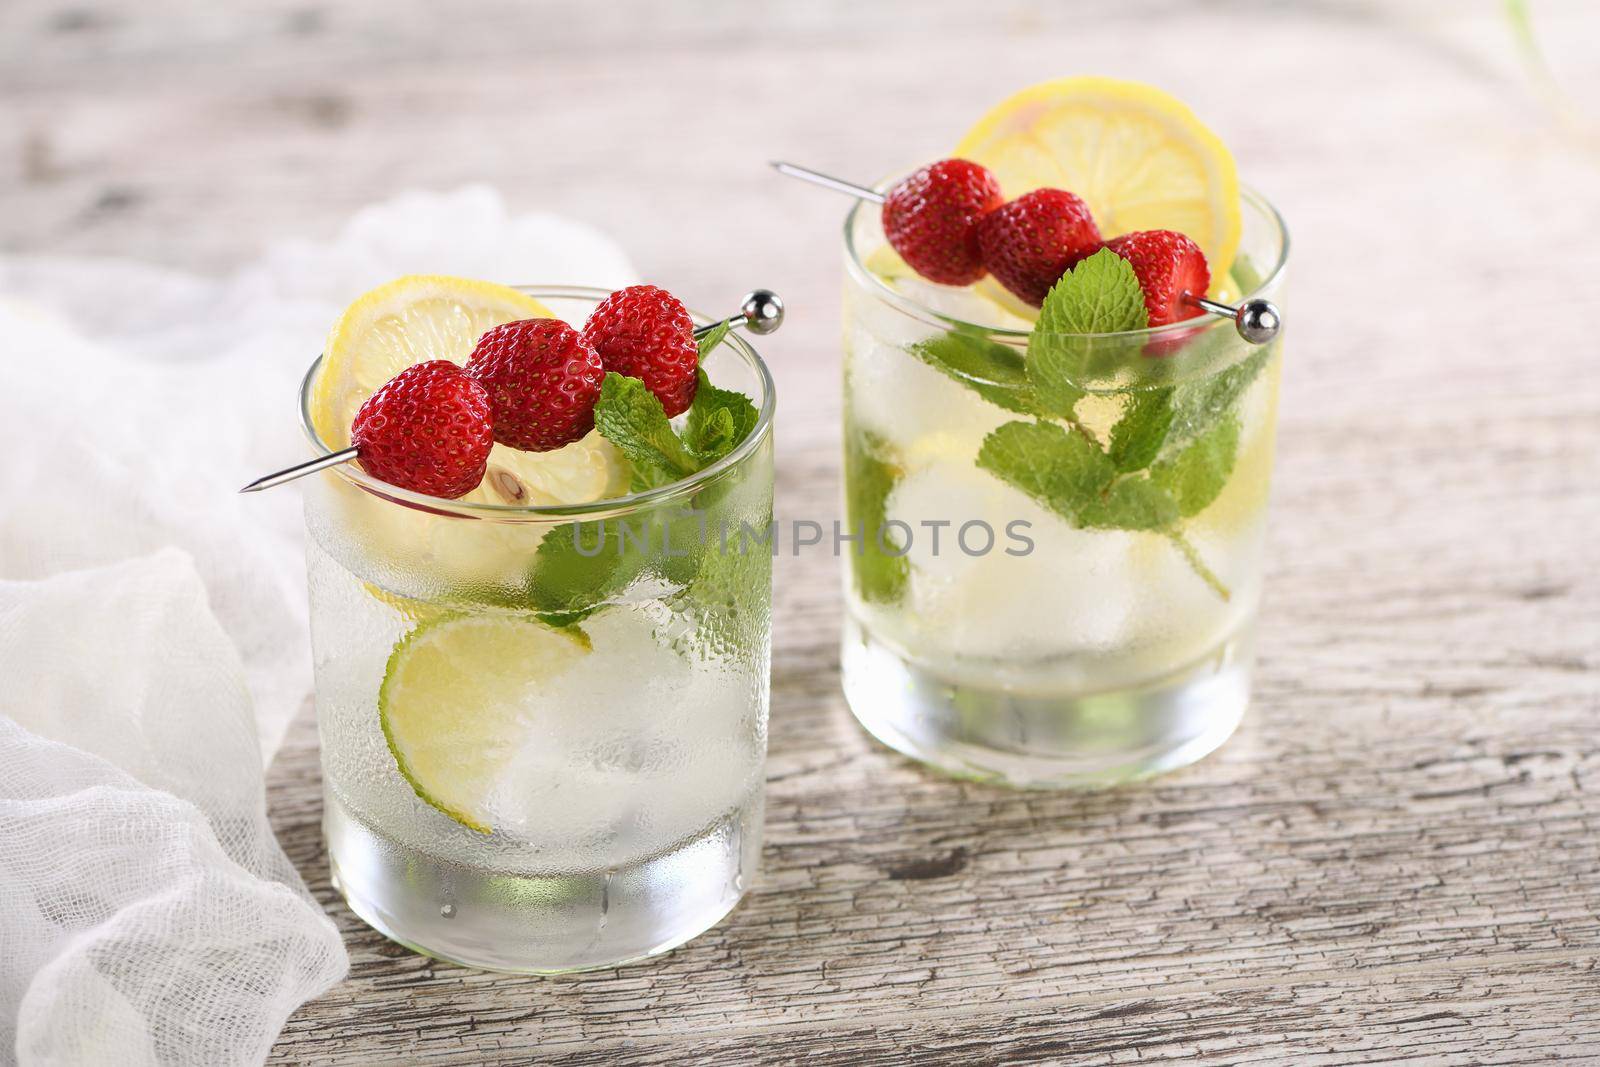 Mojito cocktail with strawberries by Apolonia